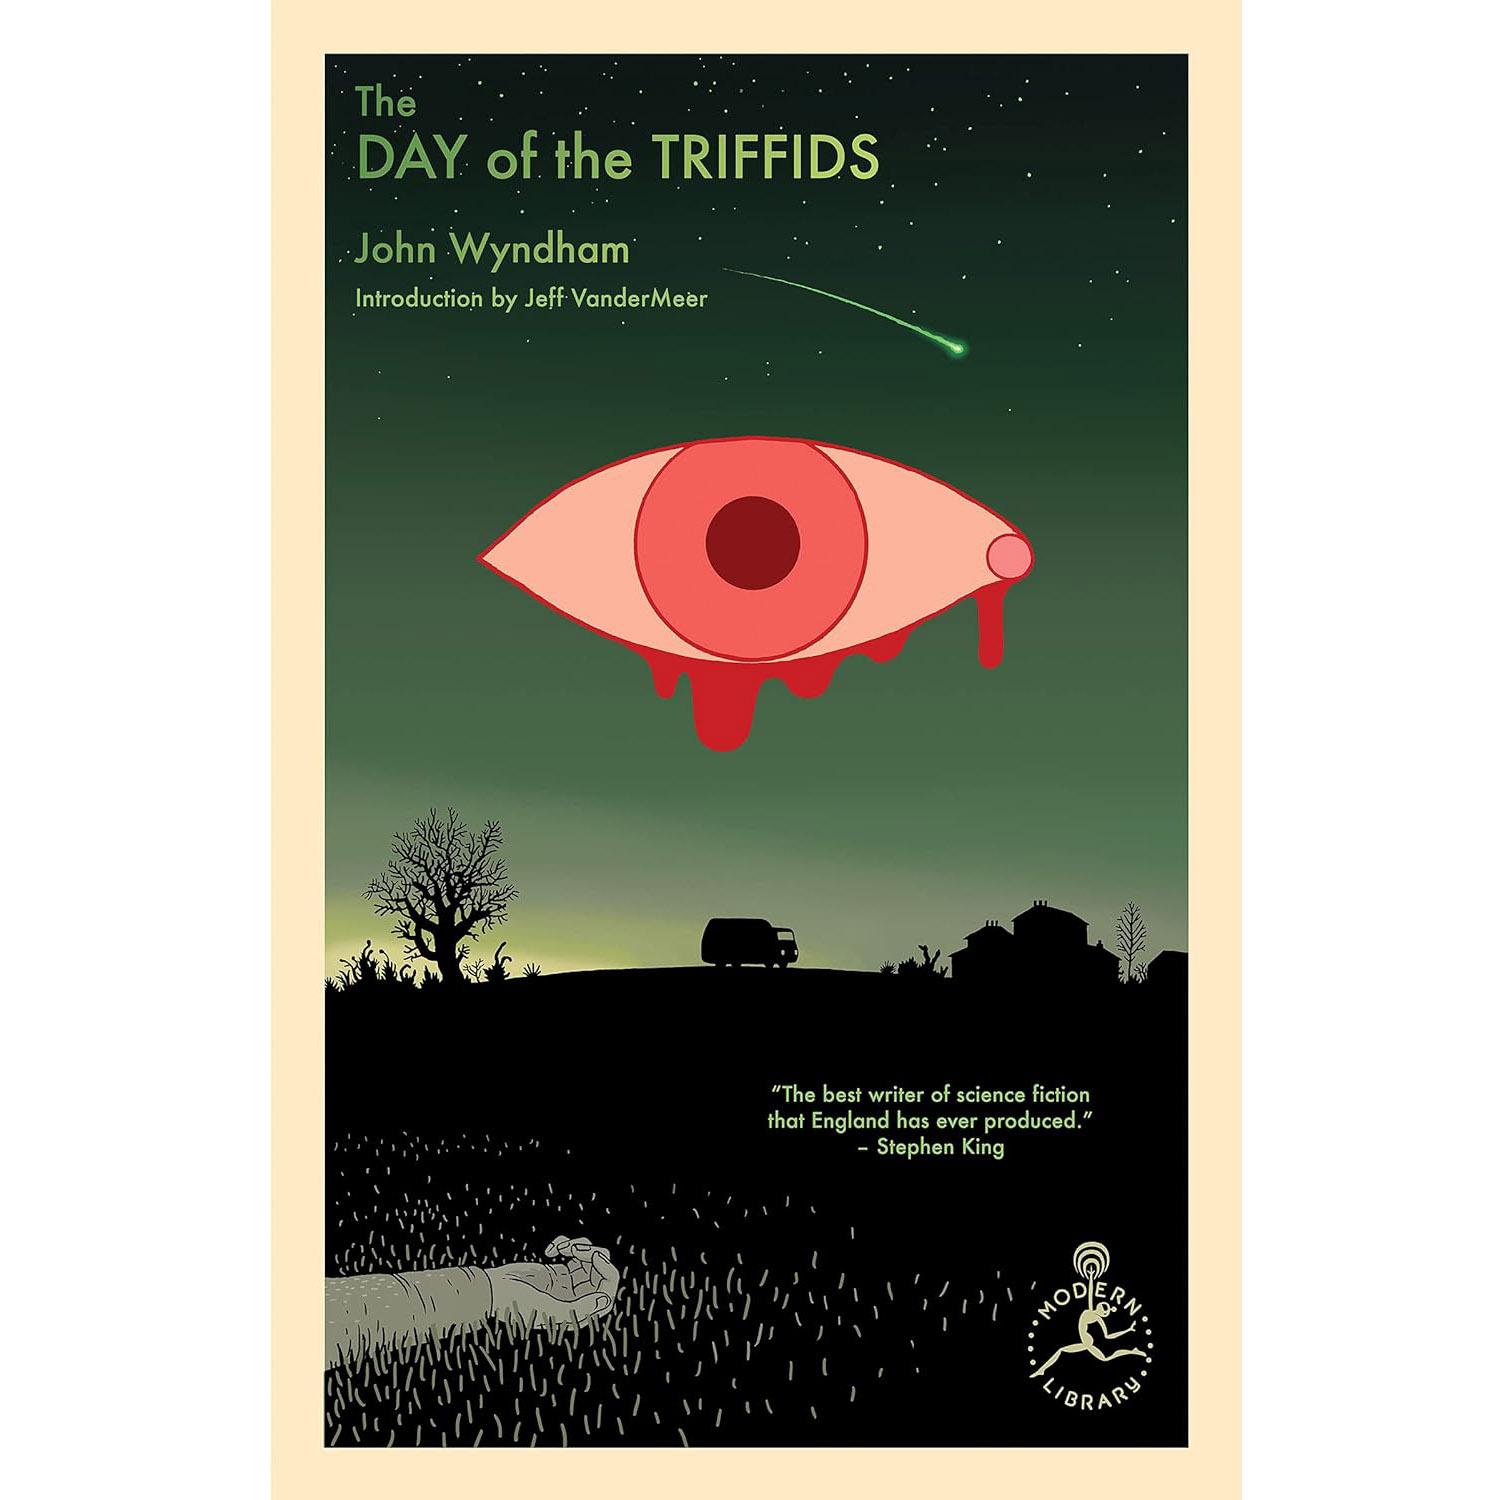 The Day of the Triffids eBook for $1.99